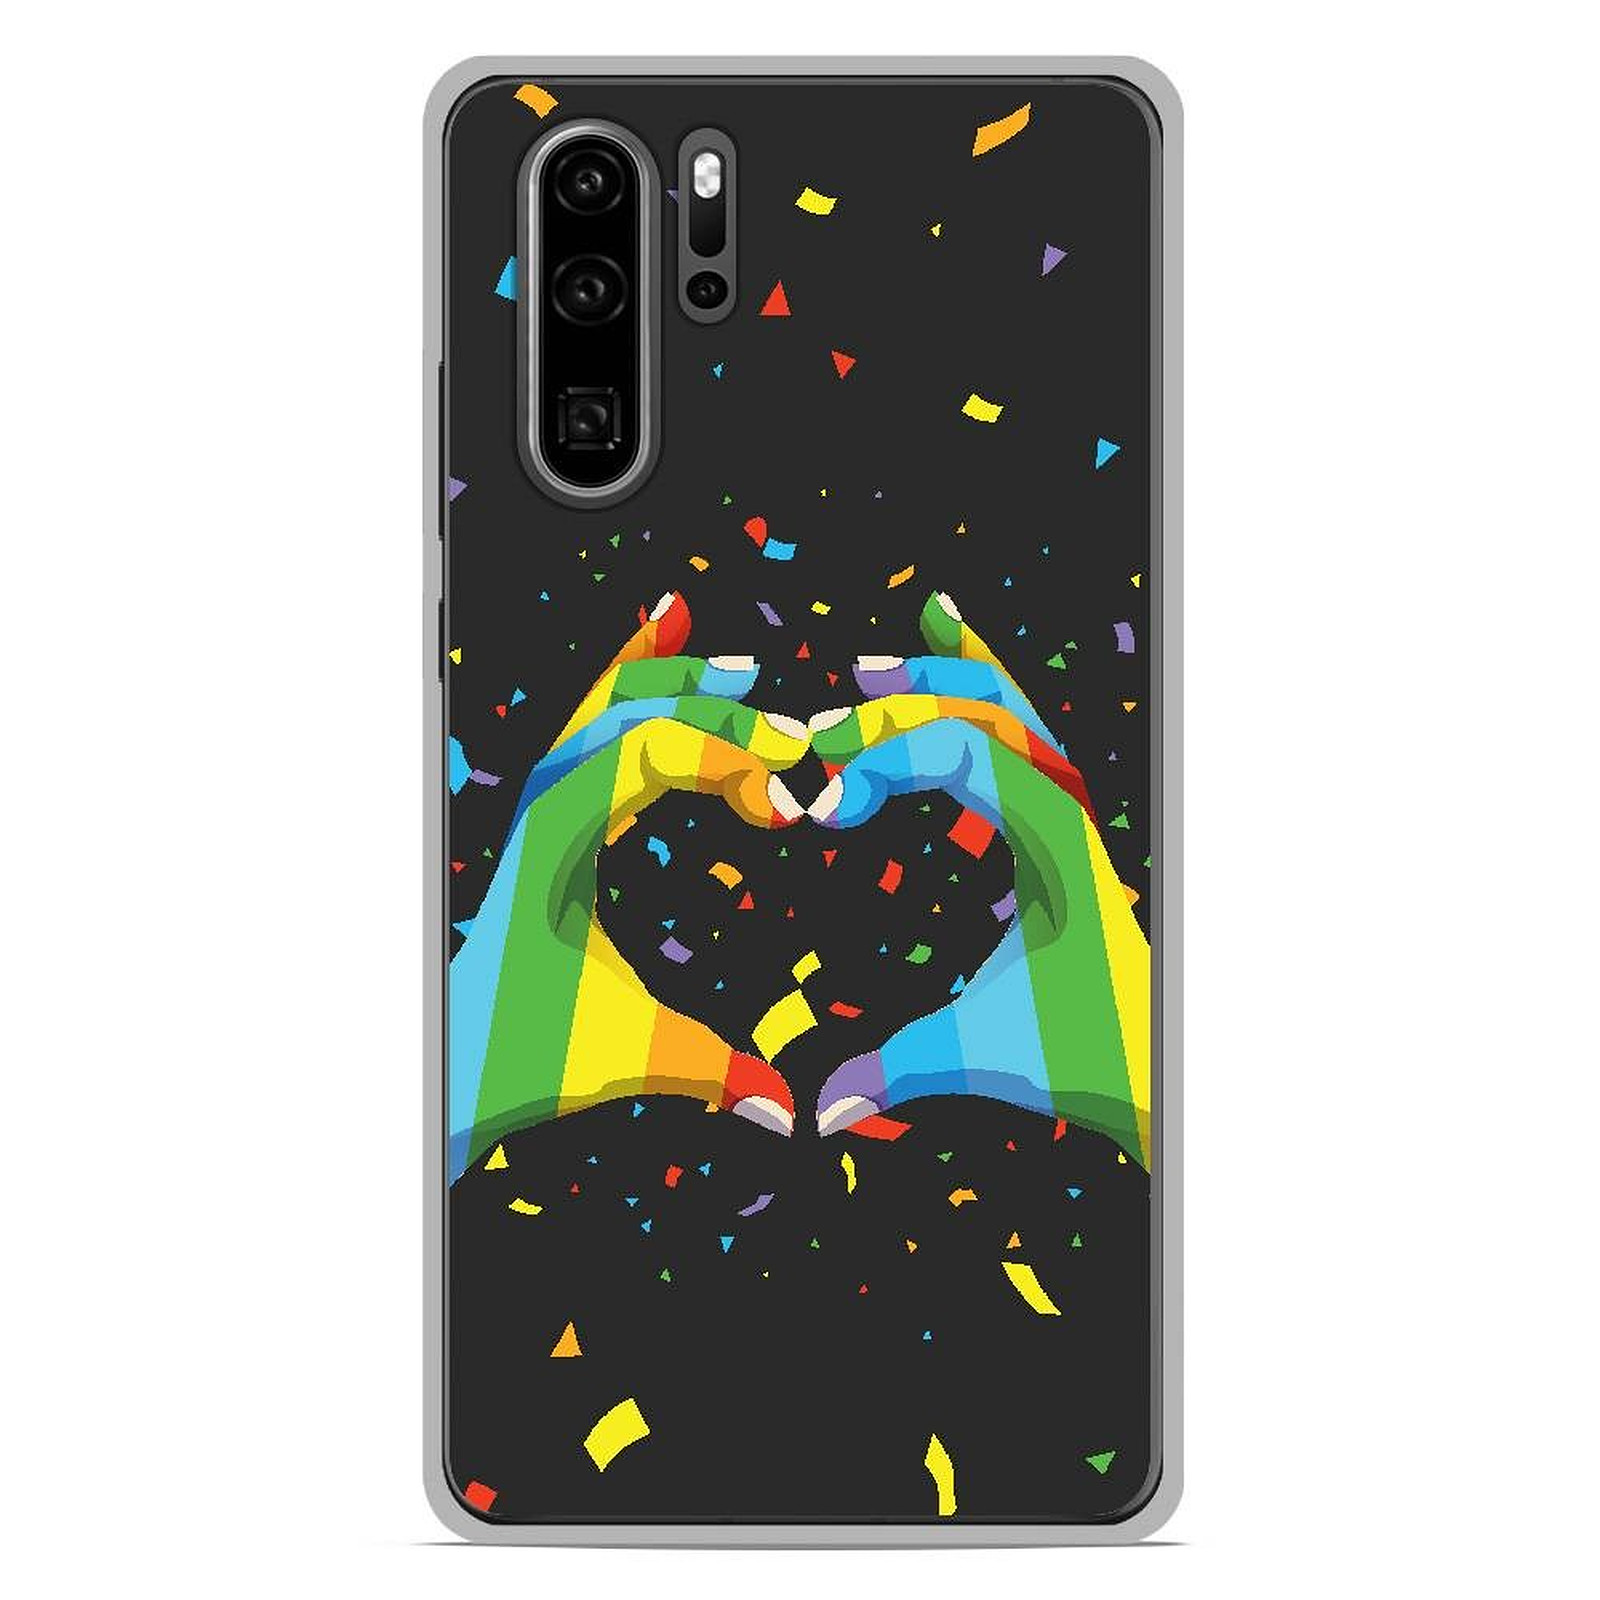 1001 Coques Coque silicone gel Huawei P30 Pro motif LGBT - Coque telephone 1001Coques